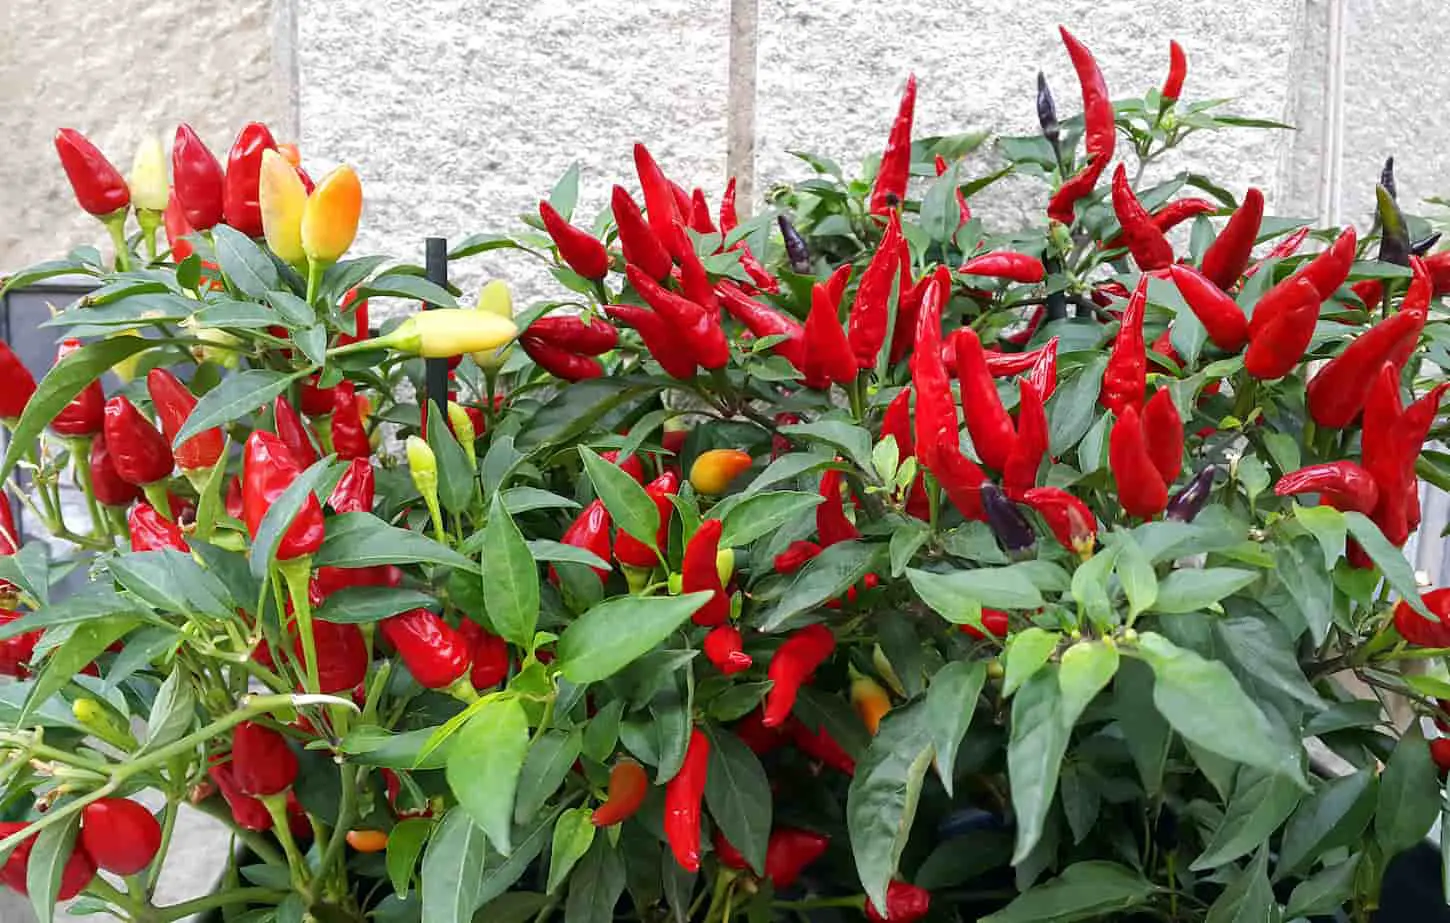 An image of colorful chili pepper plants in a garden set-up.